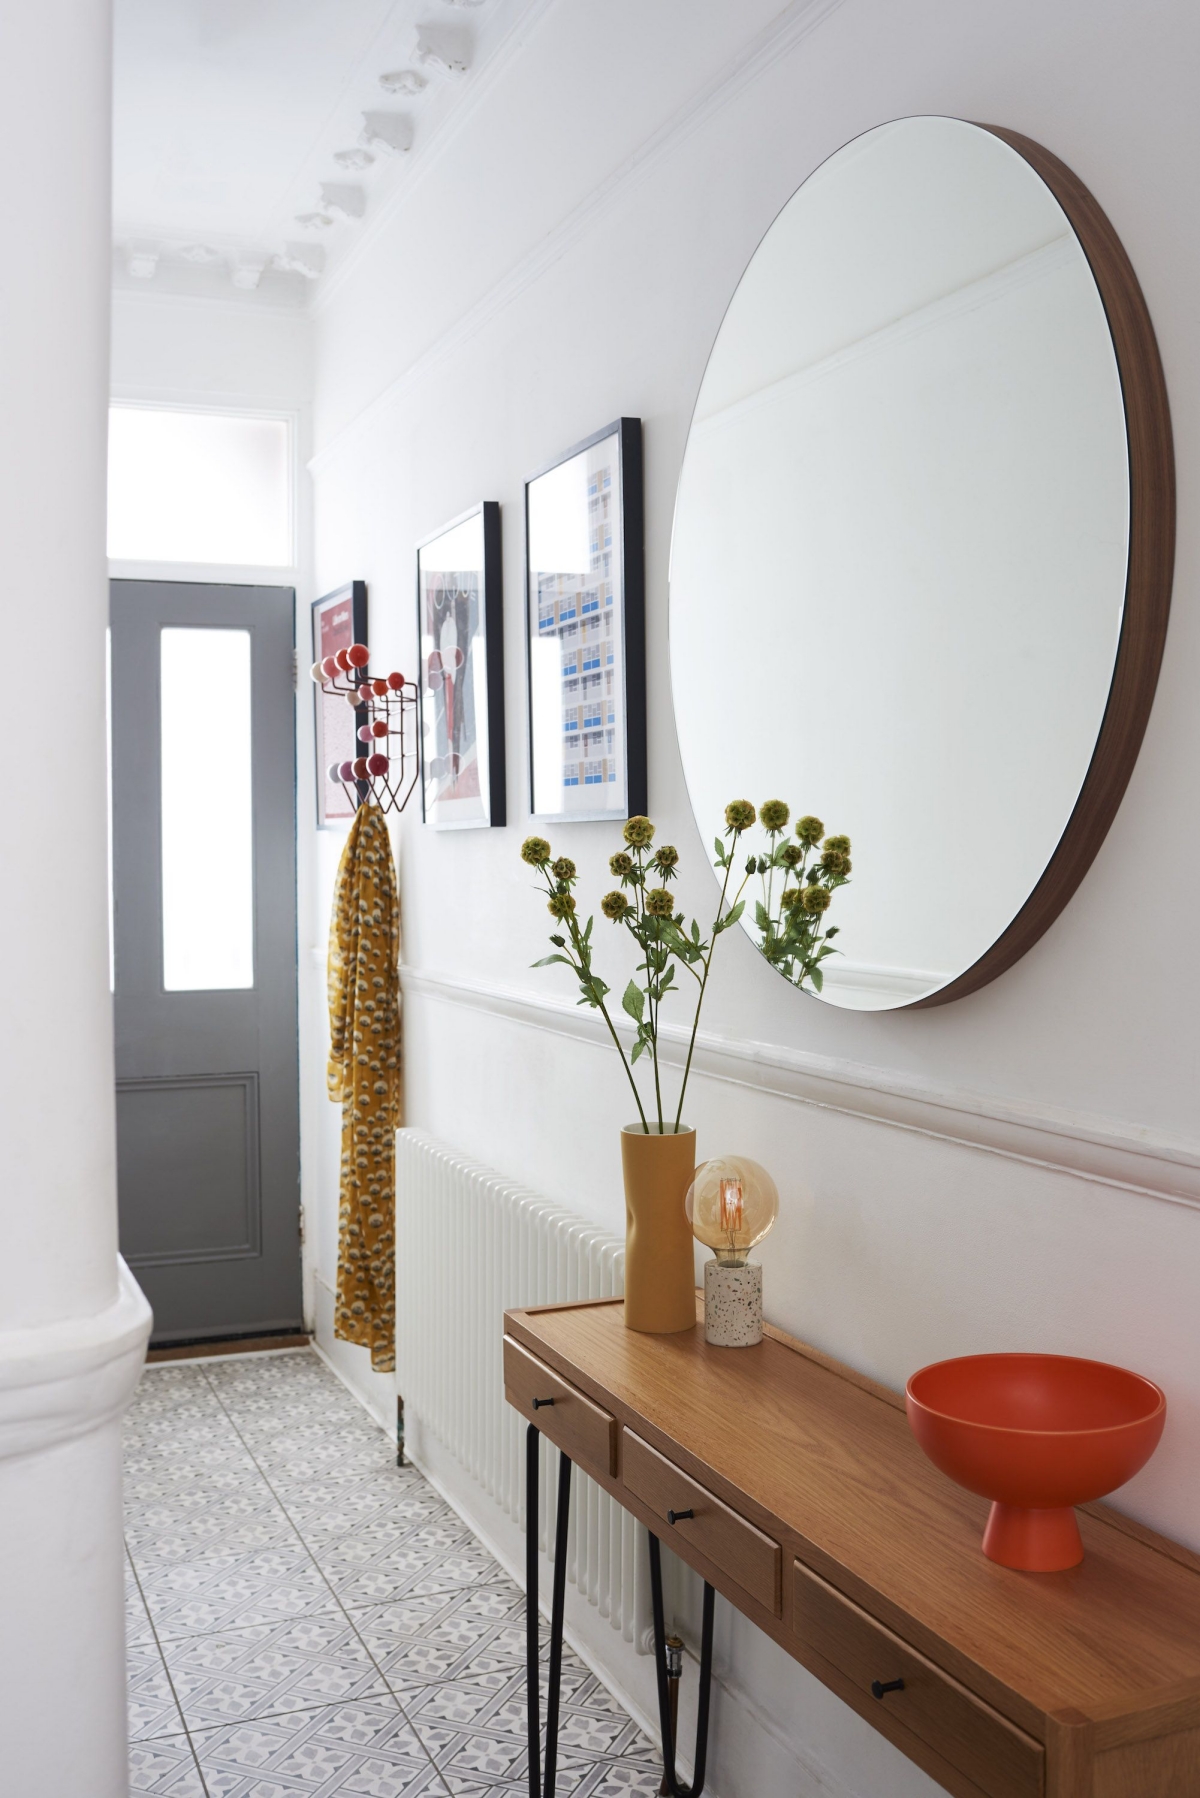 5 Basic Rules For an Aesthetic, Clutter-Free Hallway Design